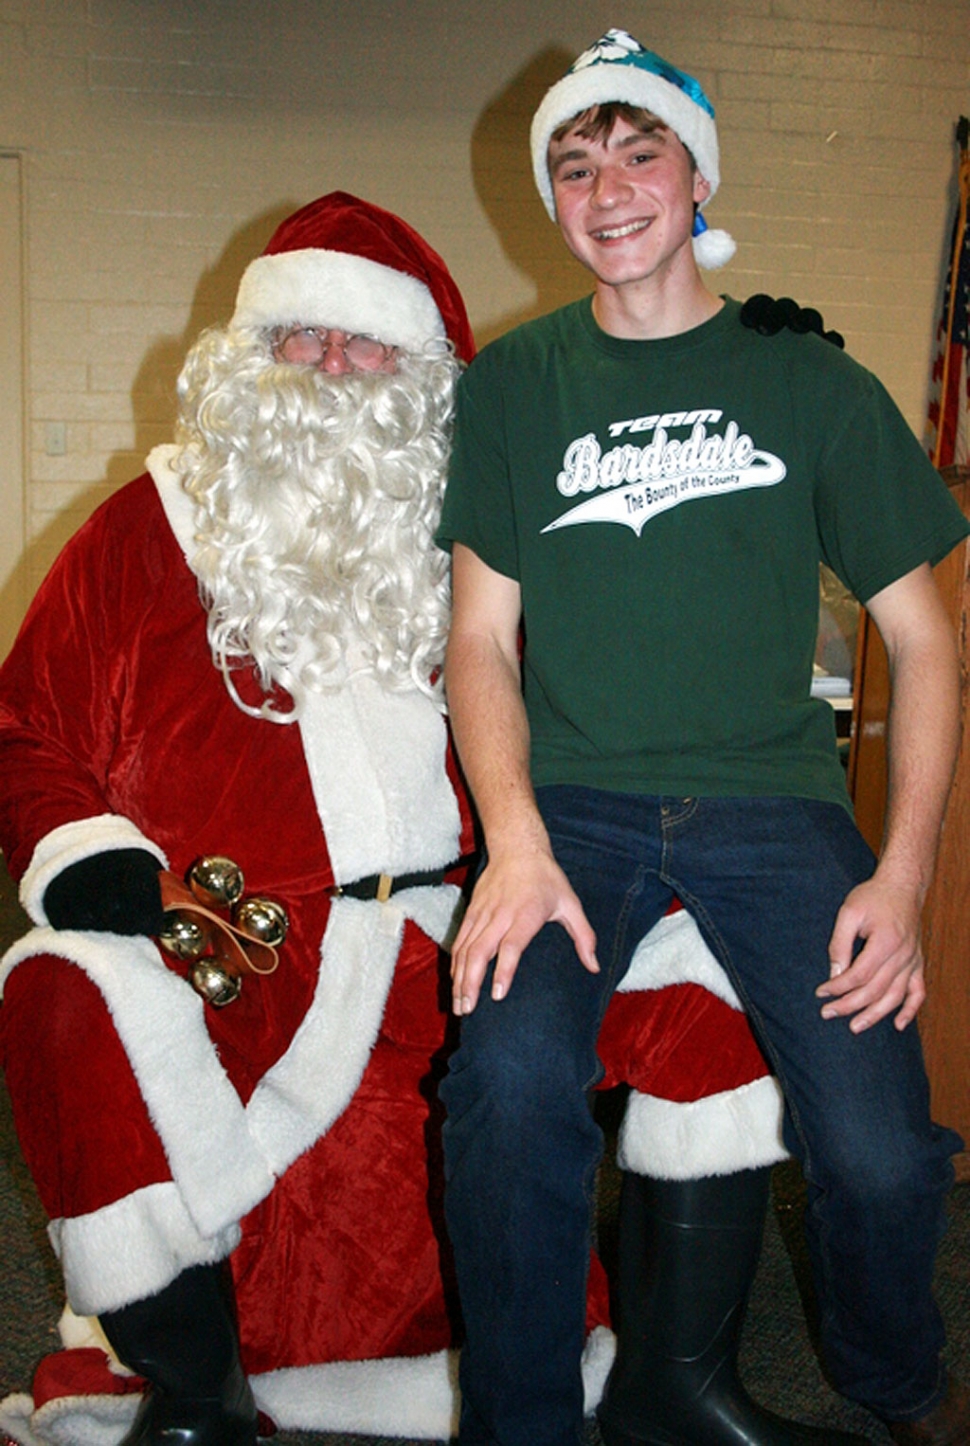 Bardsdale 4H President Timmy Klittich enjoyed visiting with Santa at the club Christmas party.